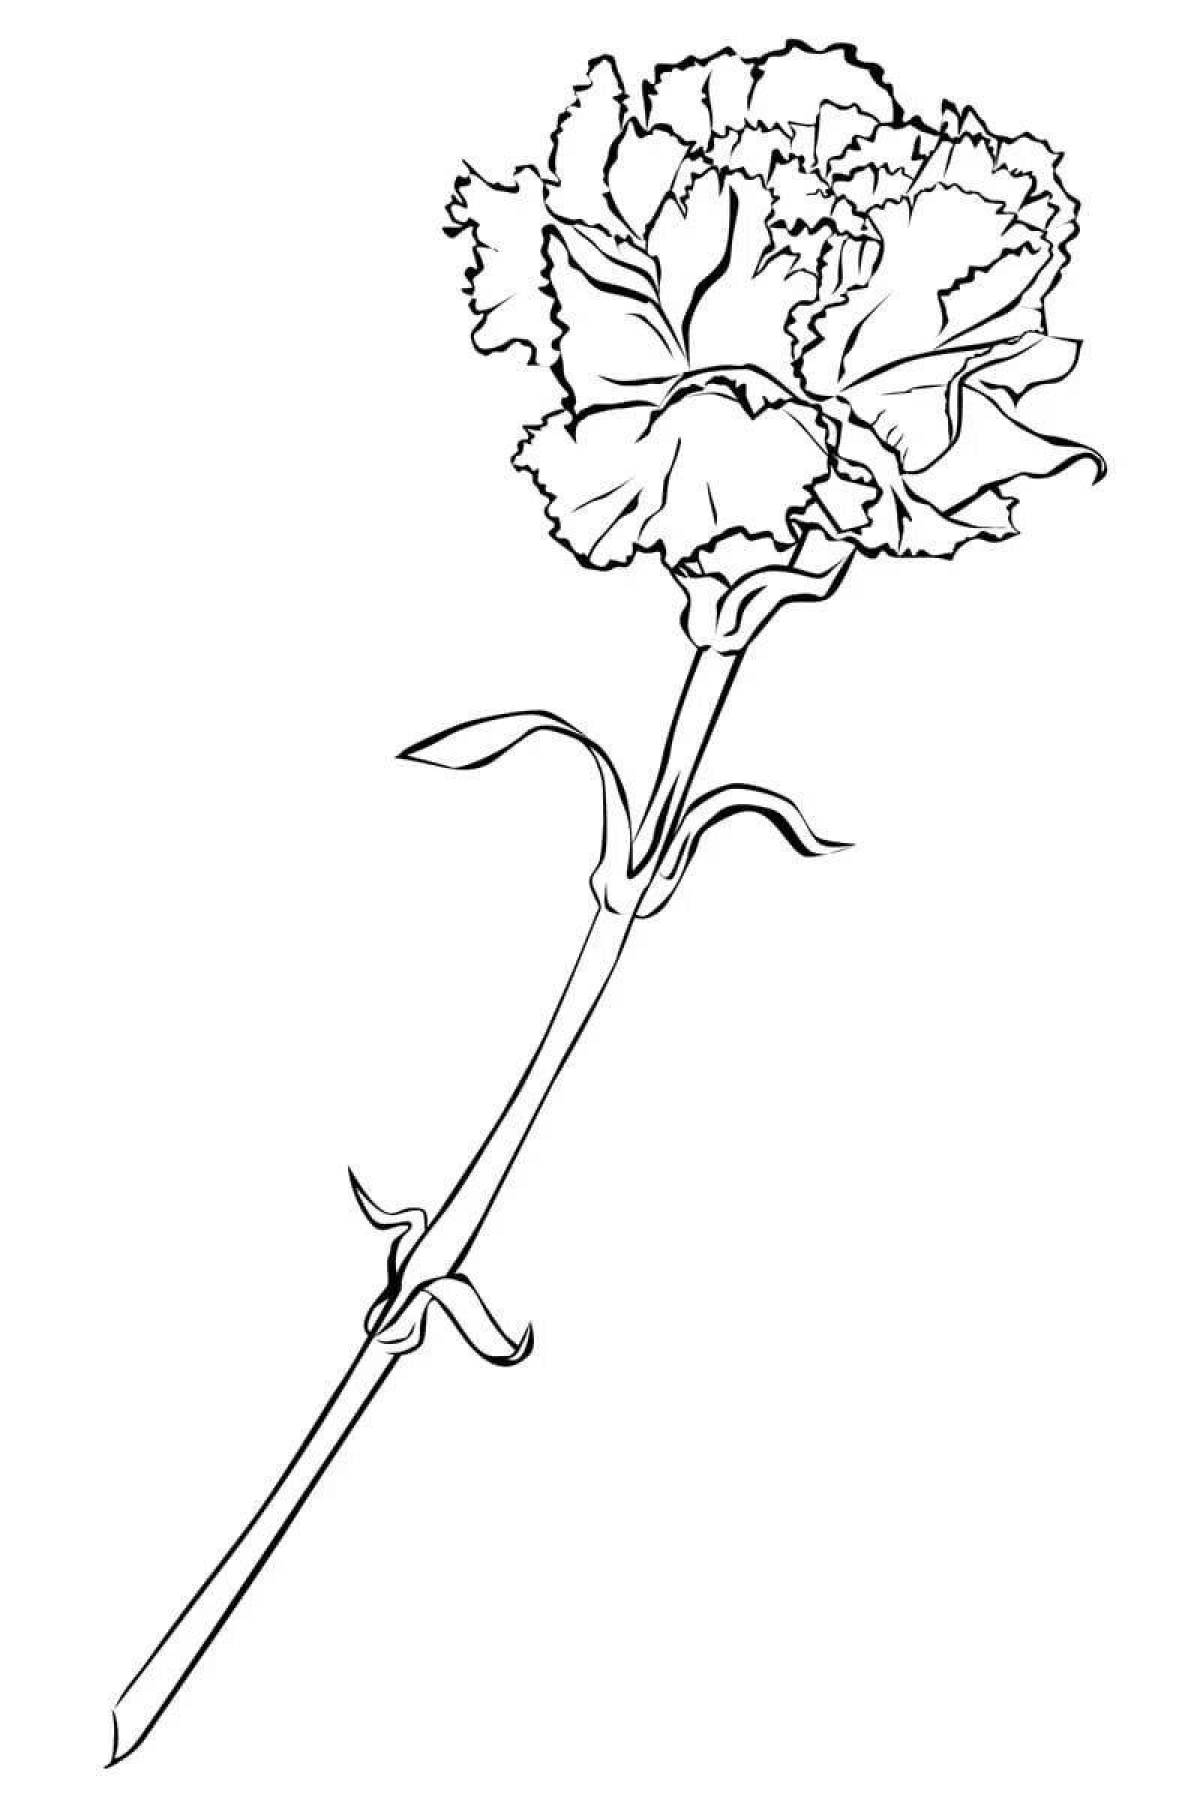 Adorable carnation coloring page